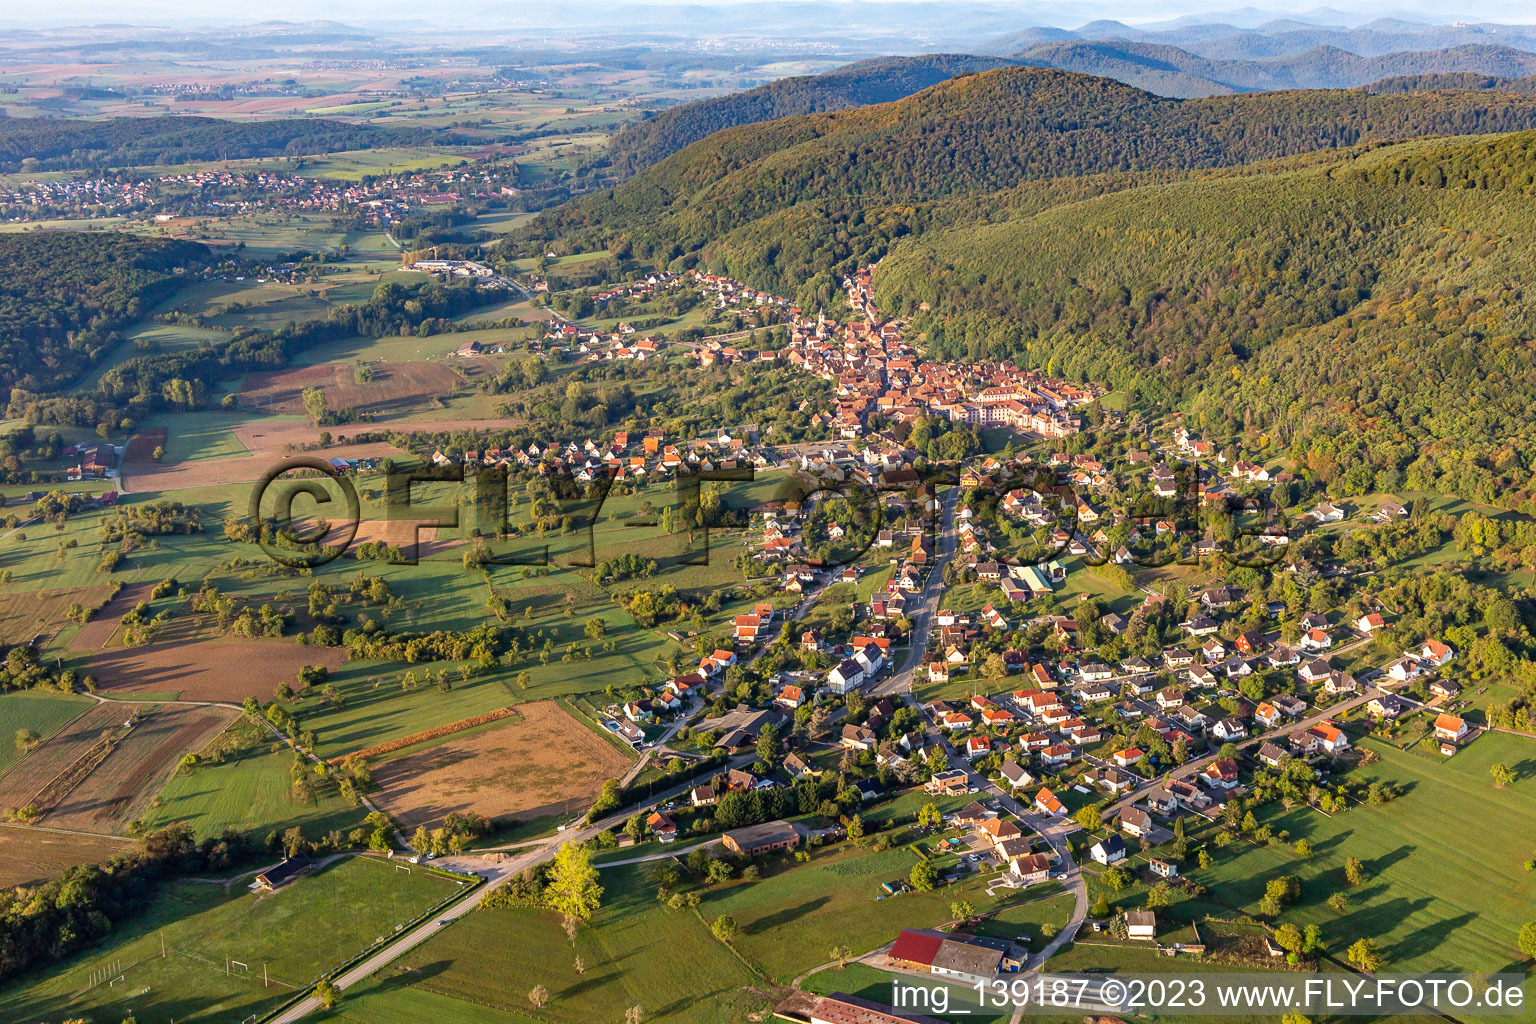 From the northeast in Oberbronn in the state Bas-Rhin, France